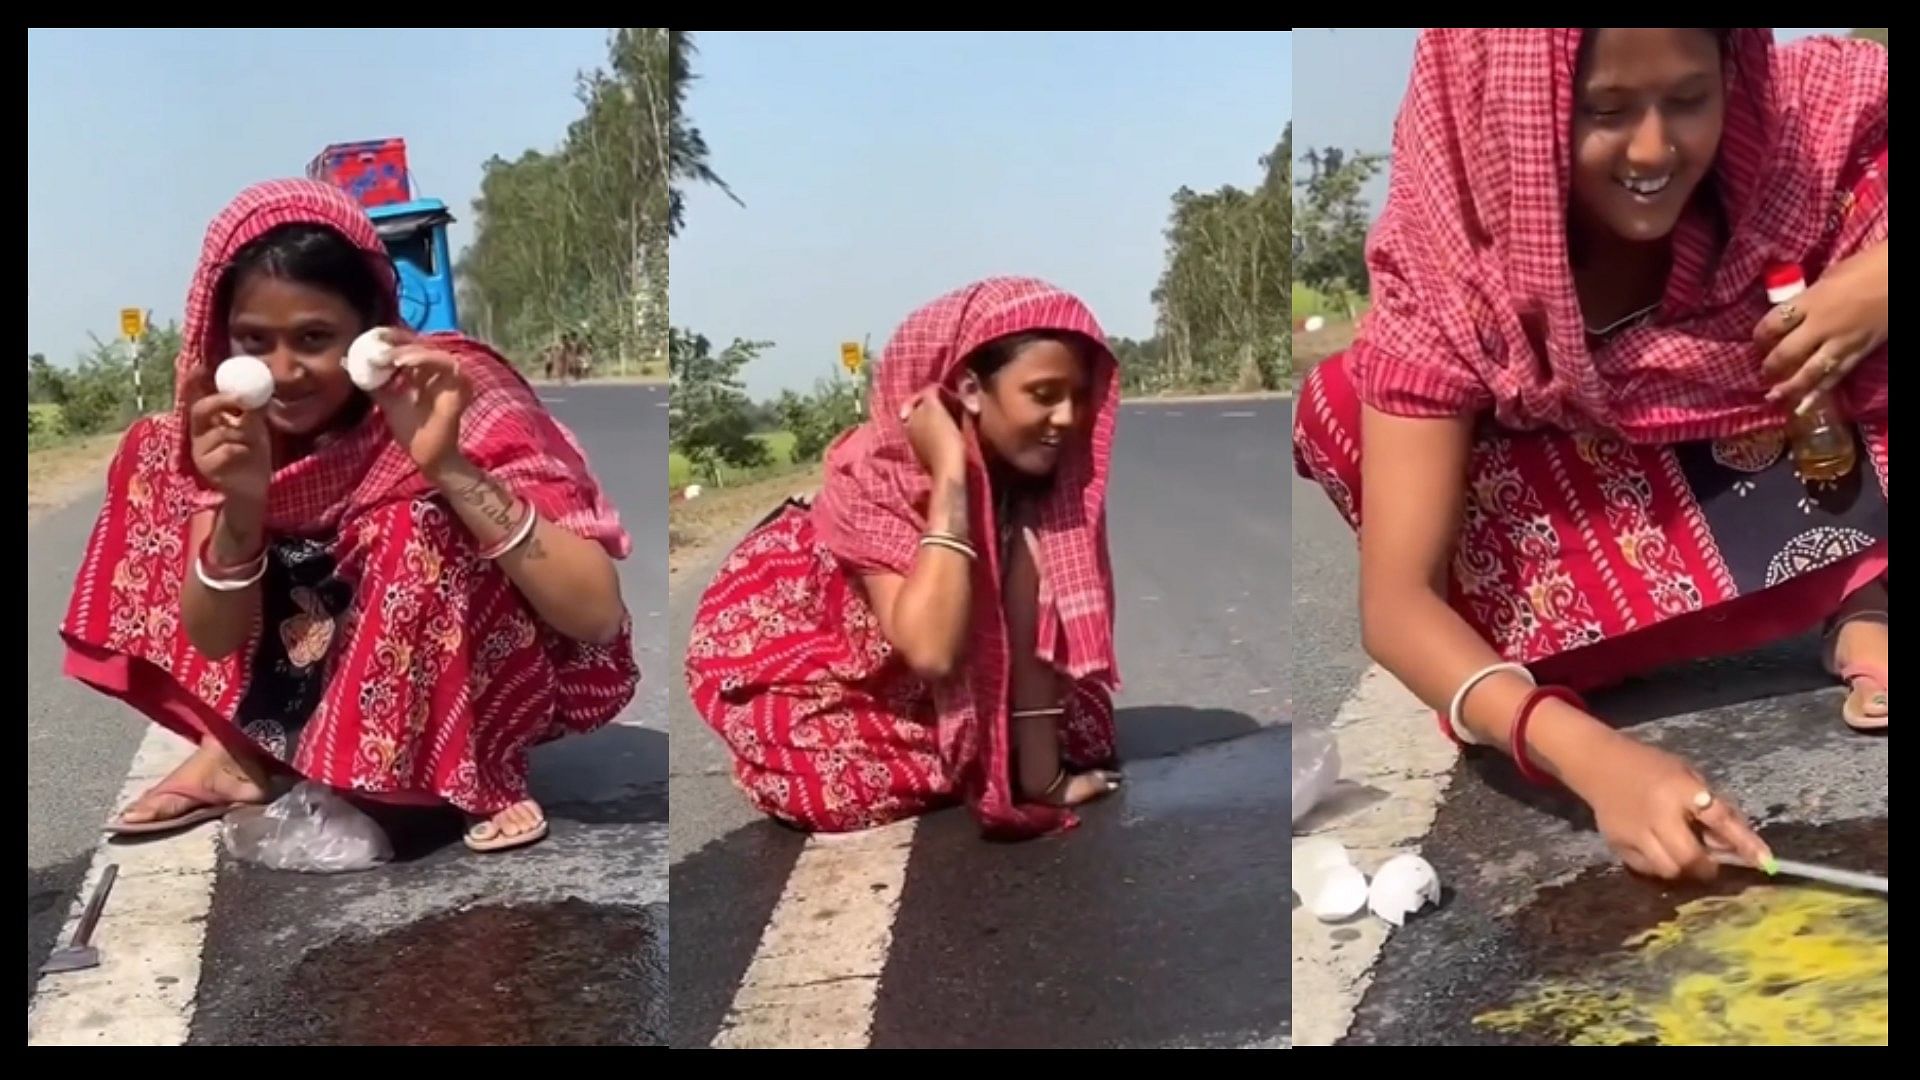 Woman making roadside omelette without gas stove video goes viral on social media